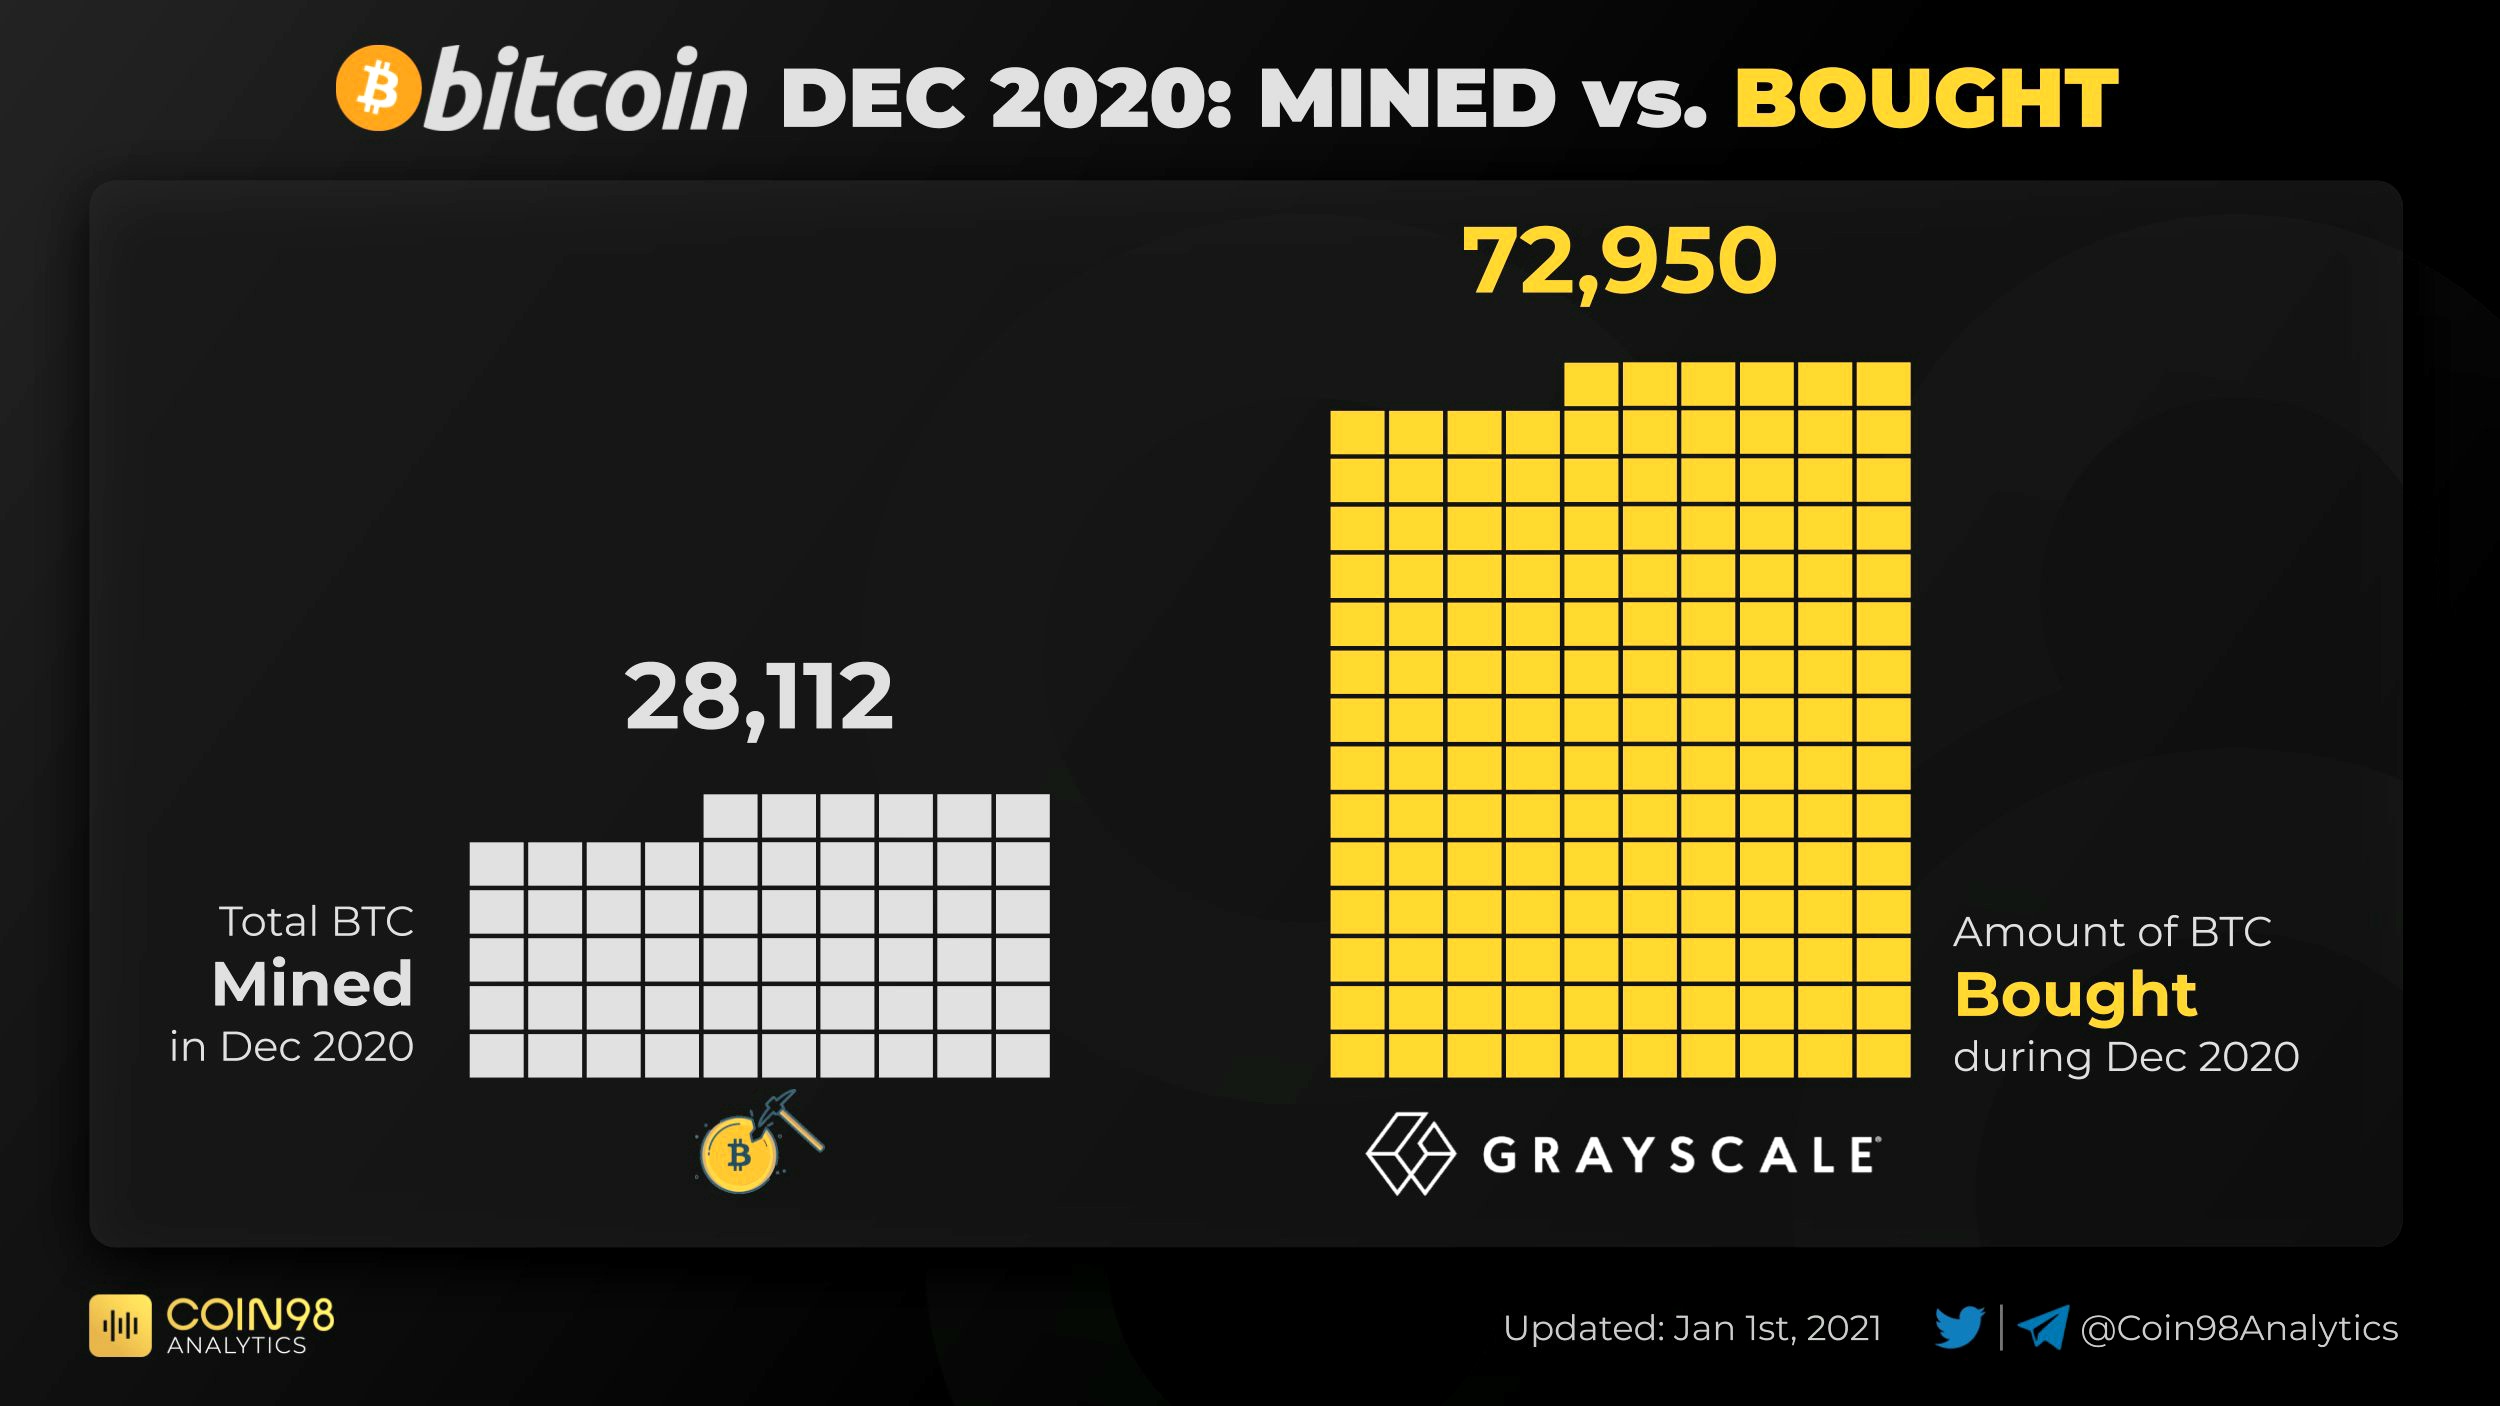 BTC mined vs. bought by Grayscale in December 2020. Source: Coin98 Analytics/ Twitter